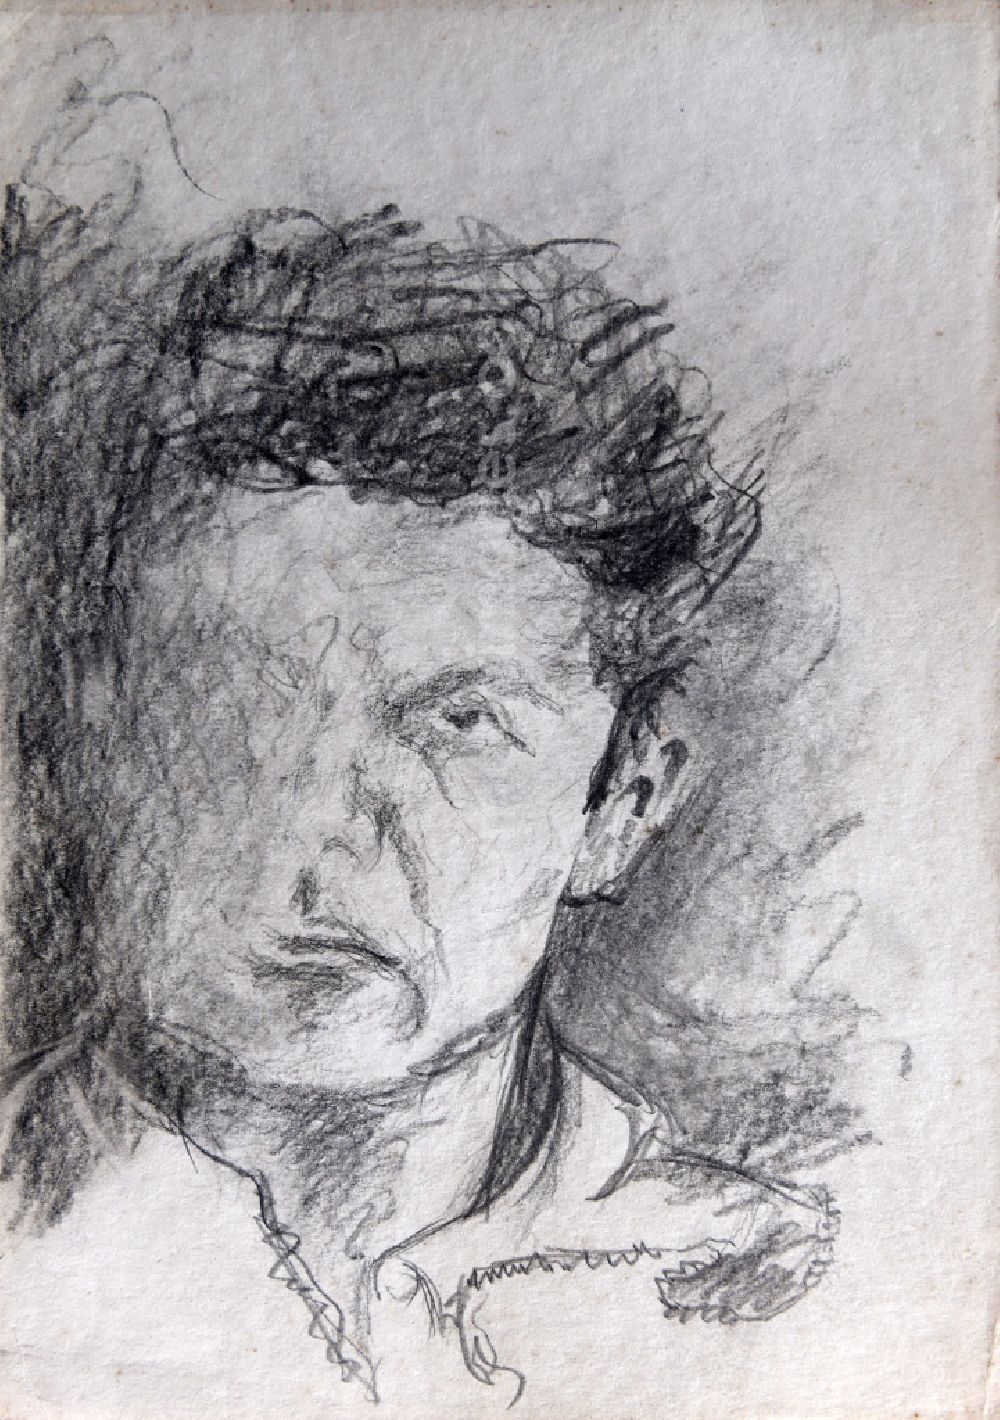 GDR picture archive: Stralsund - VG picture free work: pencil drawing self portrait by the artist Siegfried Gebser in Stralsund in the state Mecklenburg-Western Pomerania on the territory of the former GDR, German Democratic Republic